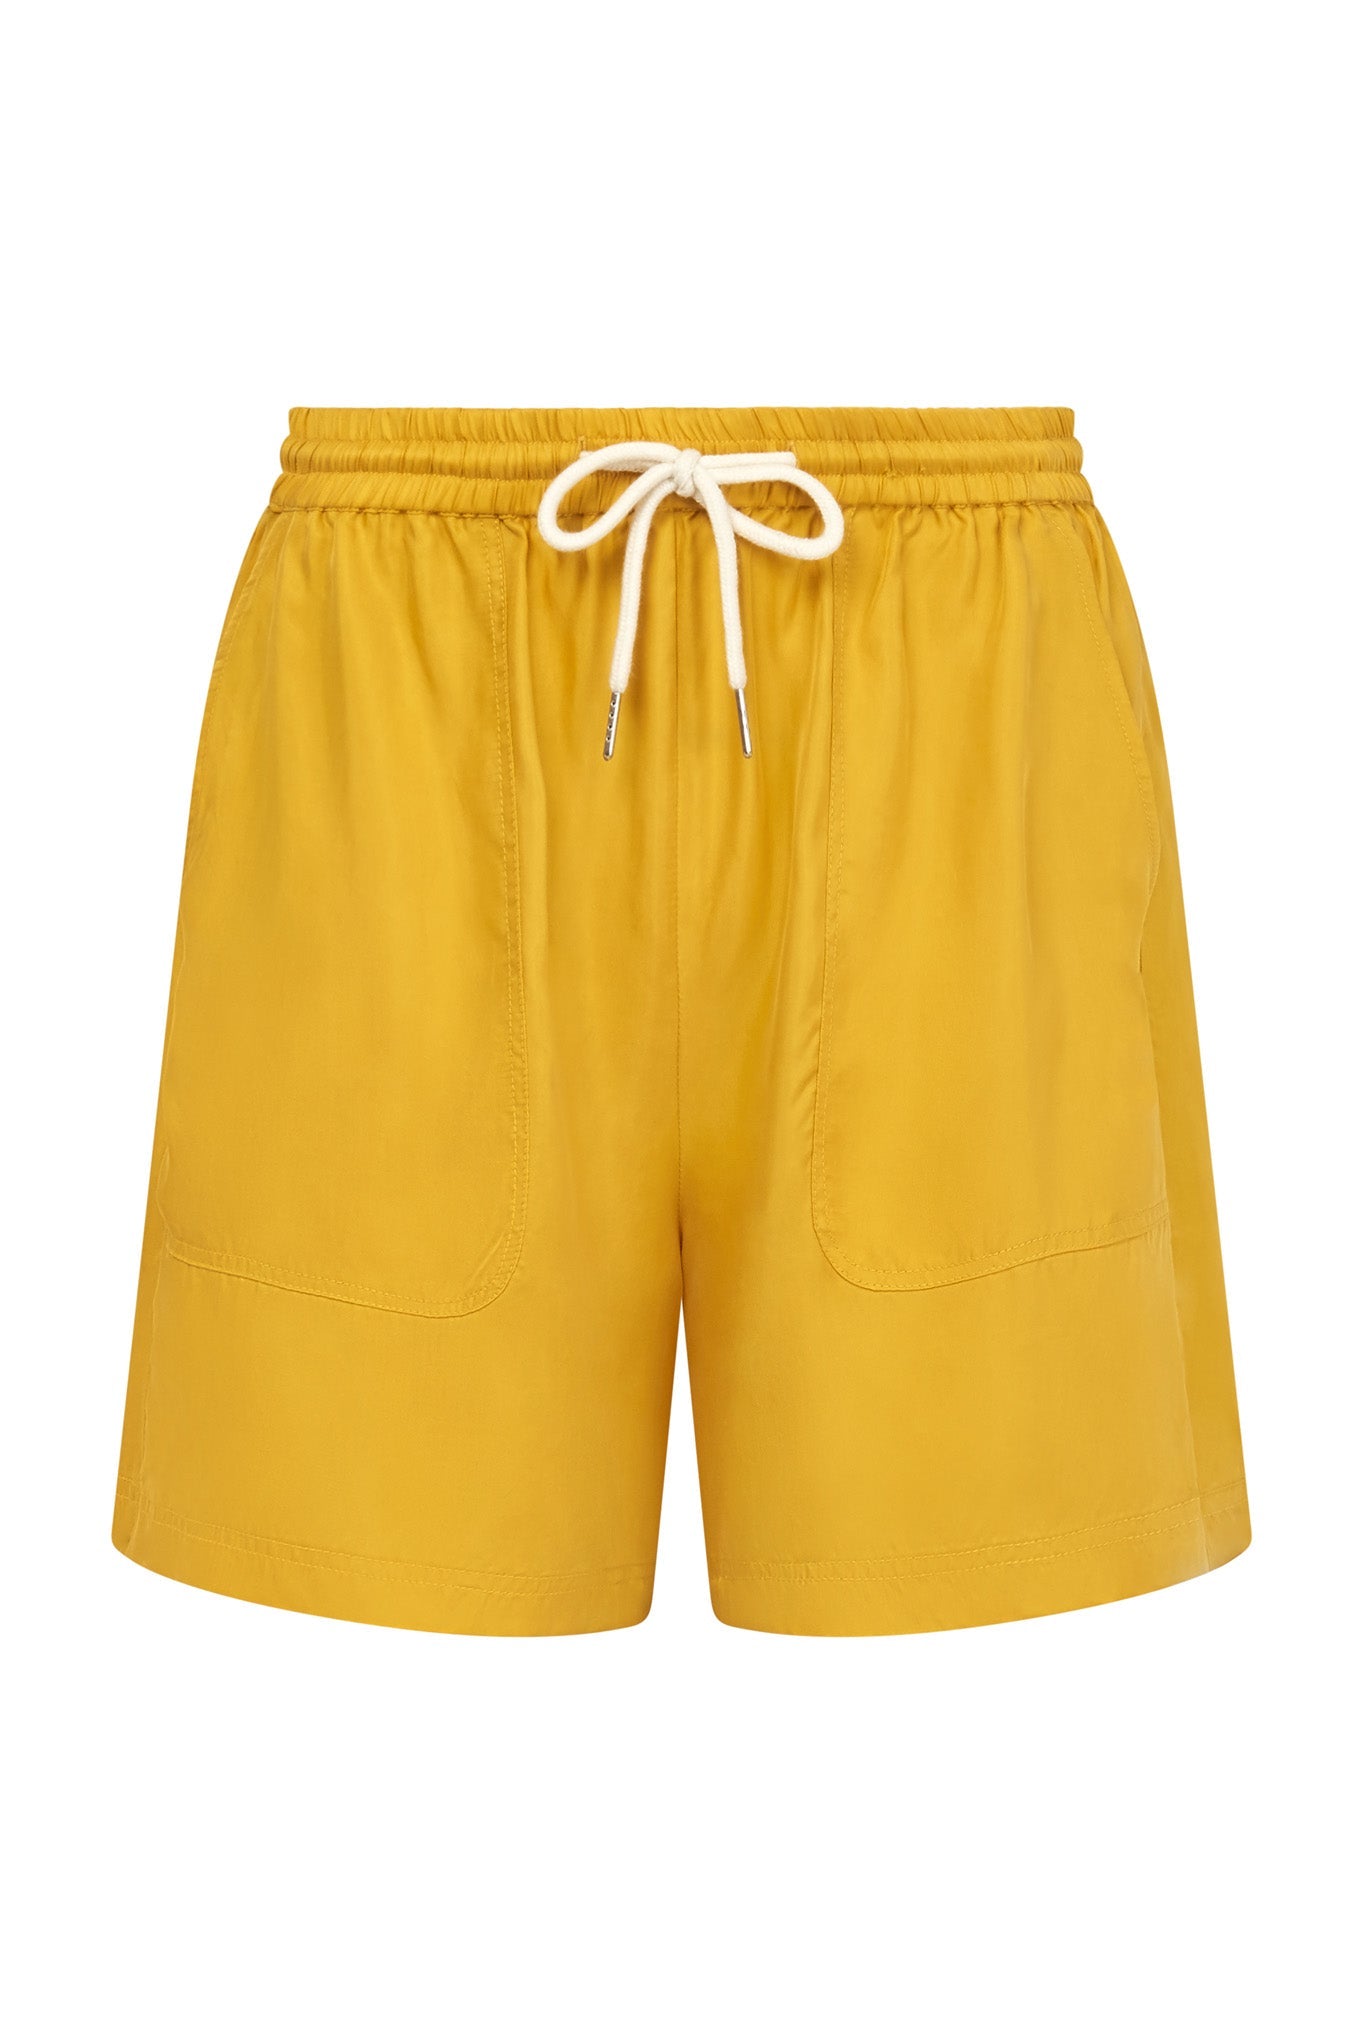 Yellow shorts HOLLY made of cupro and Lenzing from Komodo